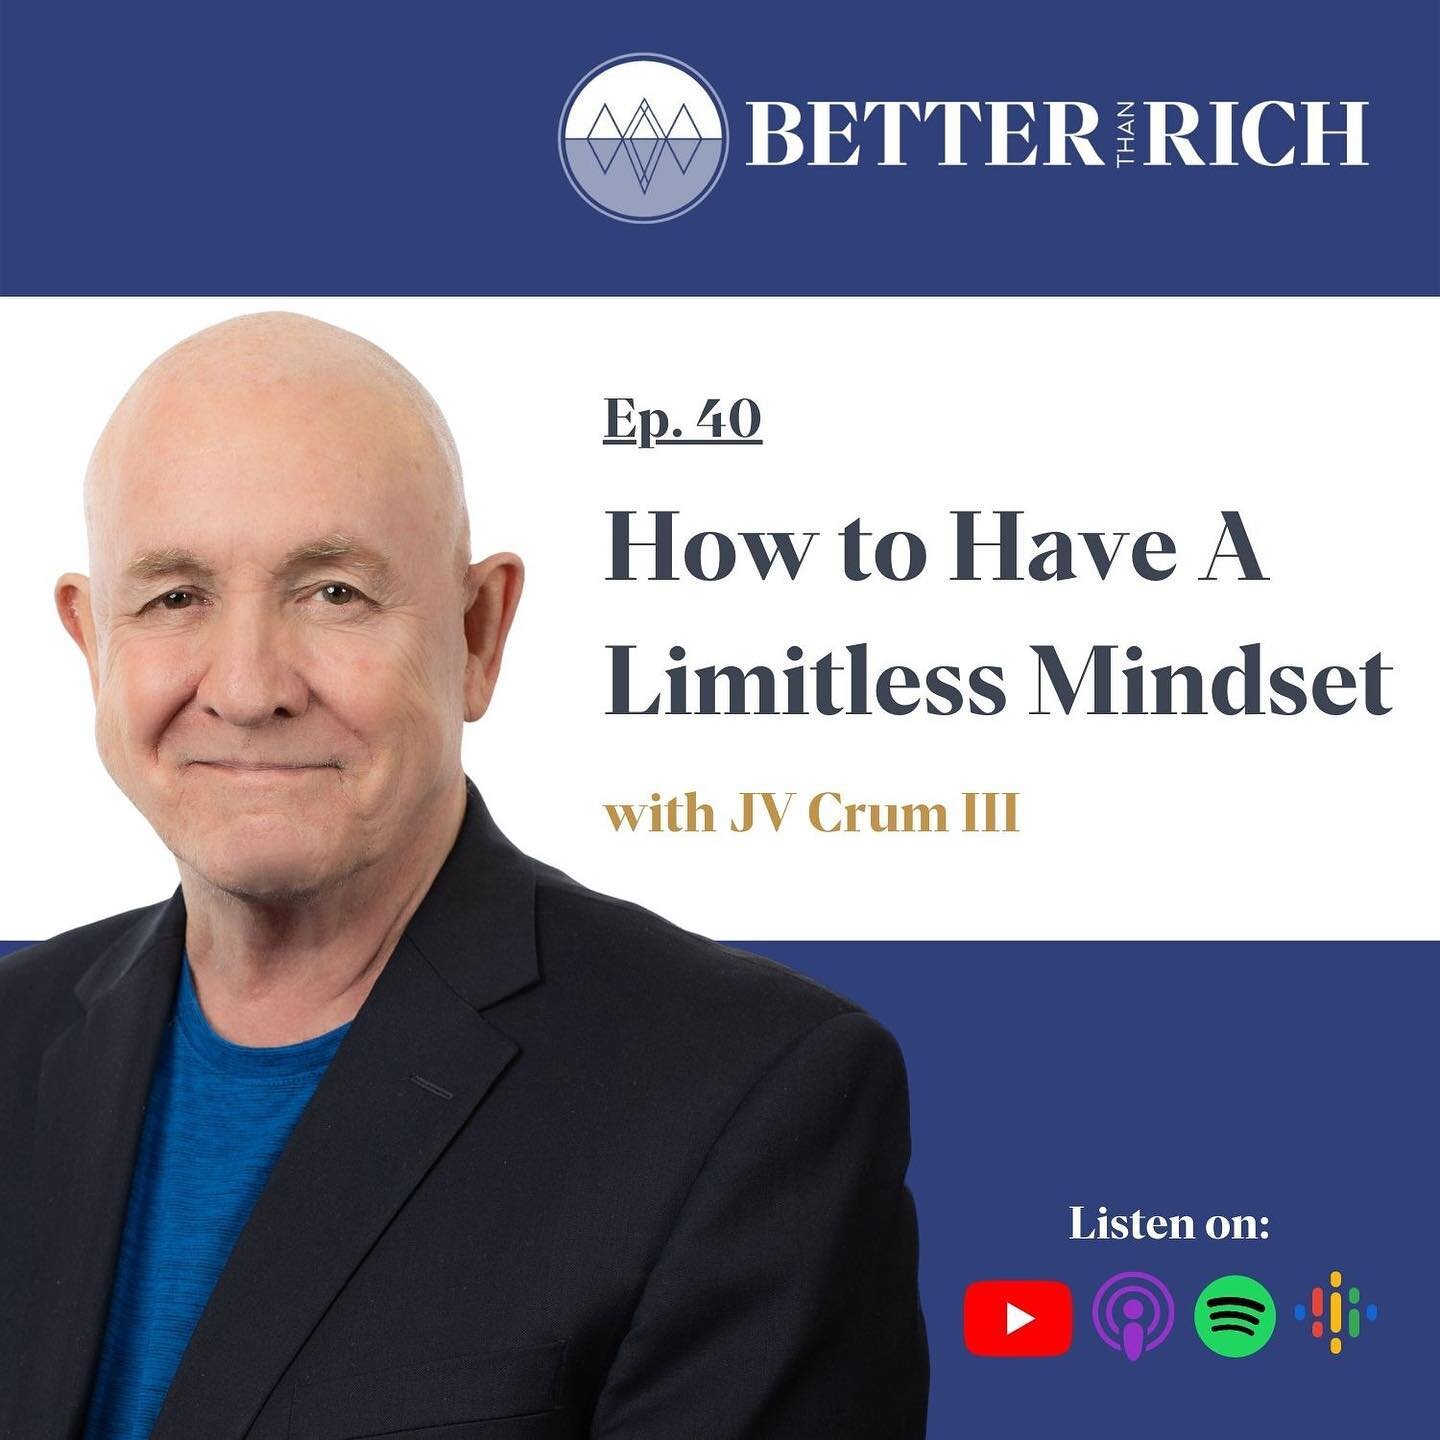 Known as the world&rsquo;s number one limitless mindset authority, Jv Crum is also the founder of Conscious Millionaire, he&rsquo;s an attorney, plus he&rsquo;s an international best-selling author. Mentoring both young and old entrepreneurs to becom